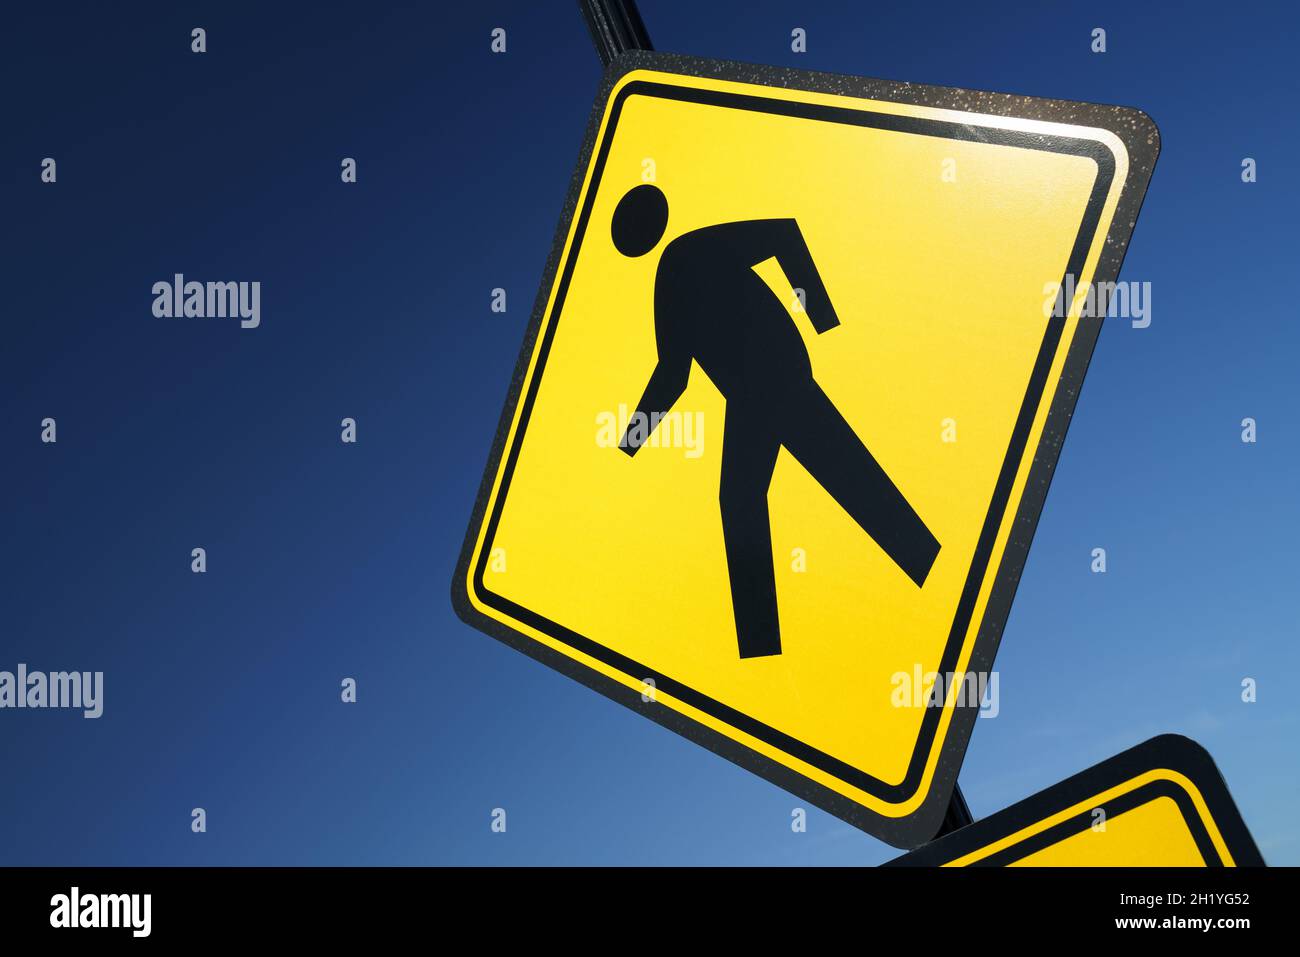 A bold and colorful scene, with a bright yellow 'pedestrian crossing' street sign (showing a human form walking) contrasted against a deep blue sky. Stock Photo